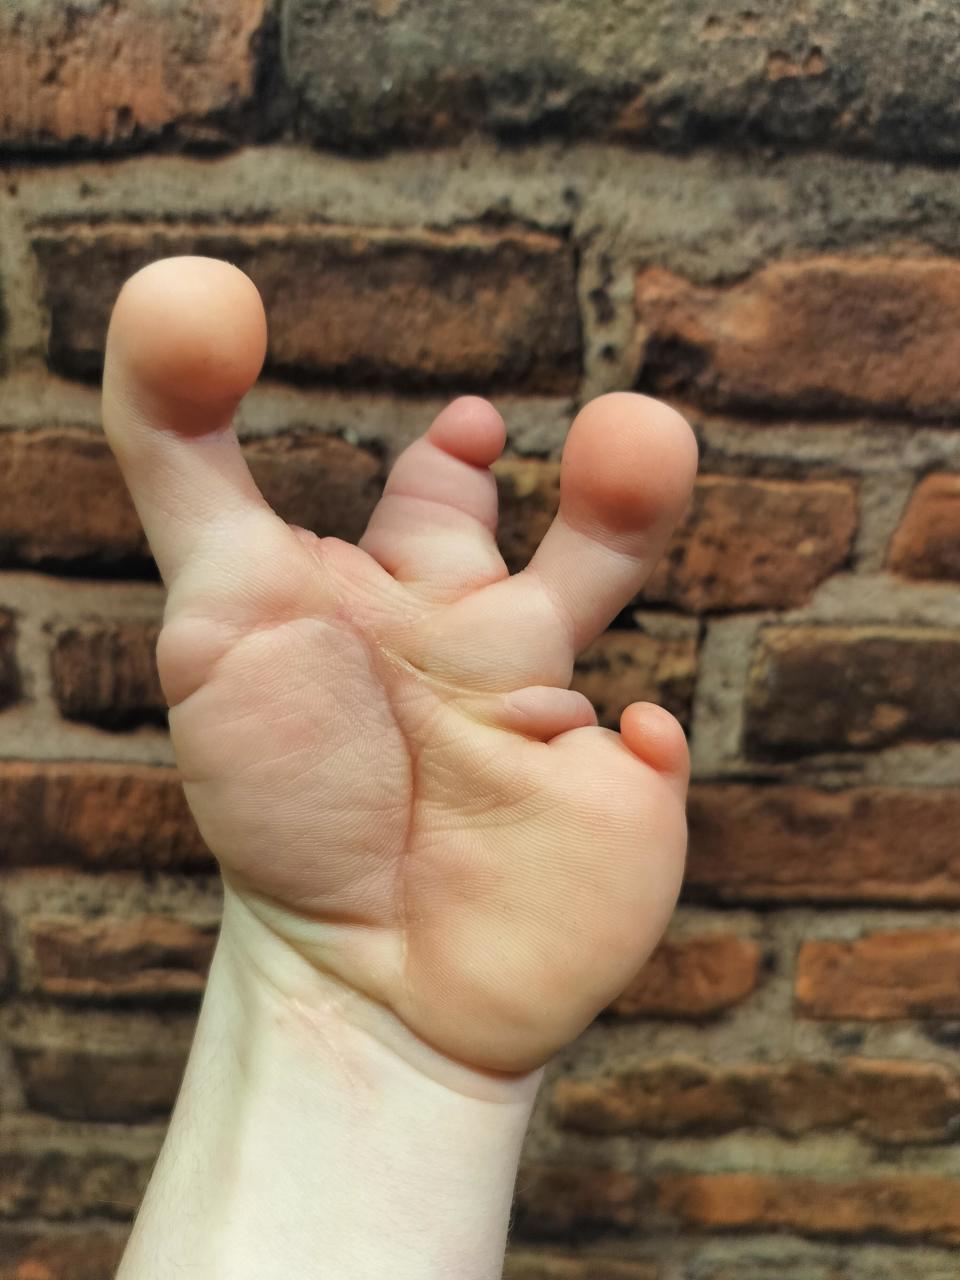 A person's hand with double thumb mutation